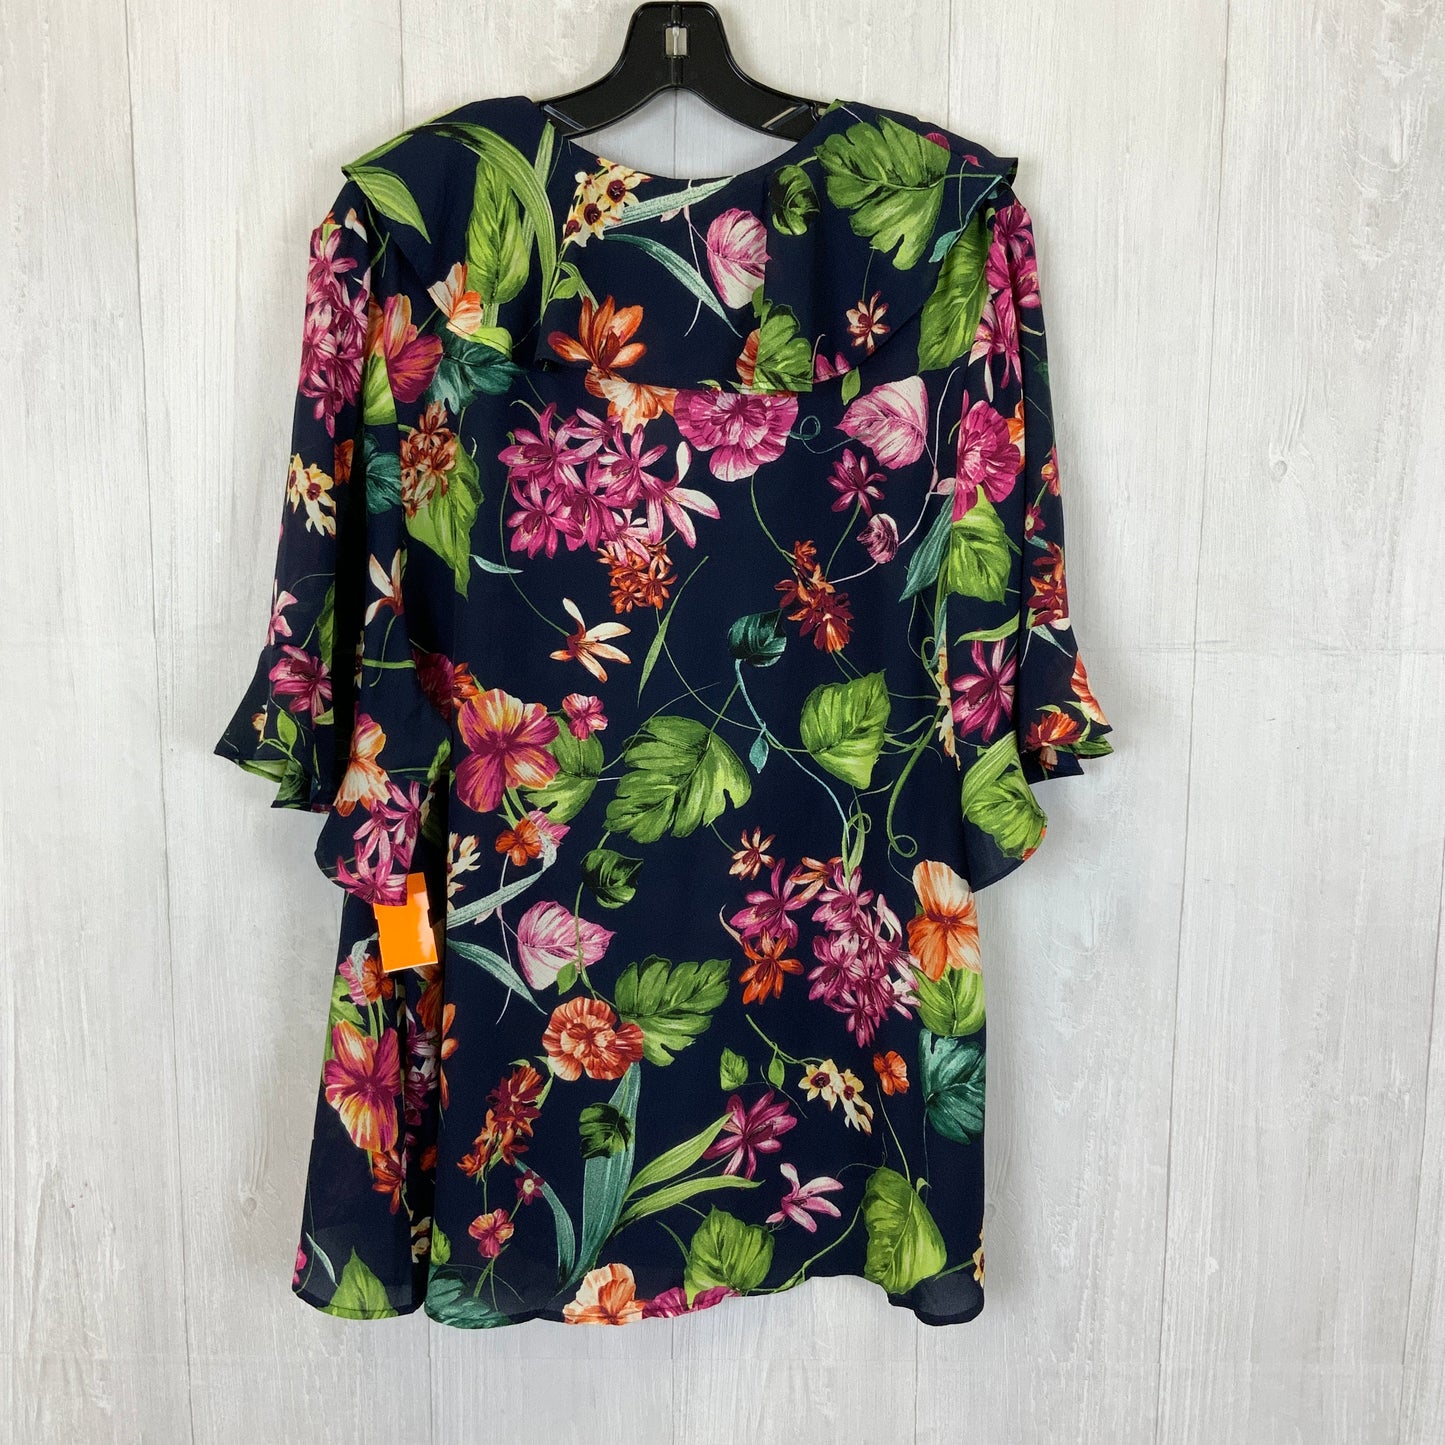 Top Short Sleeve By She + Sky  Size: 1x